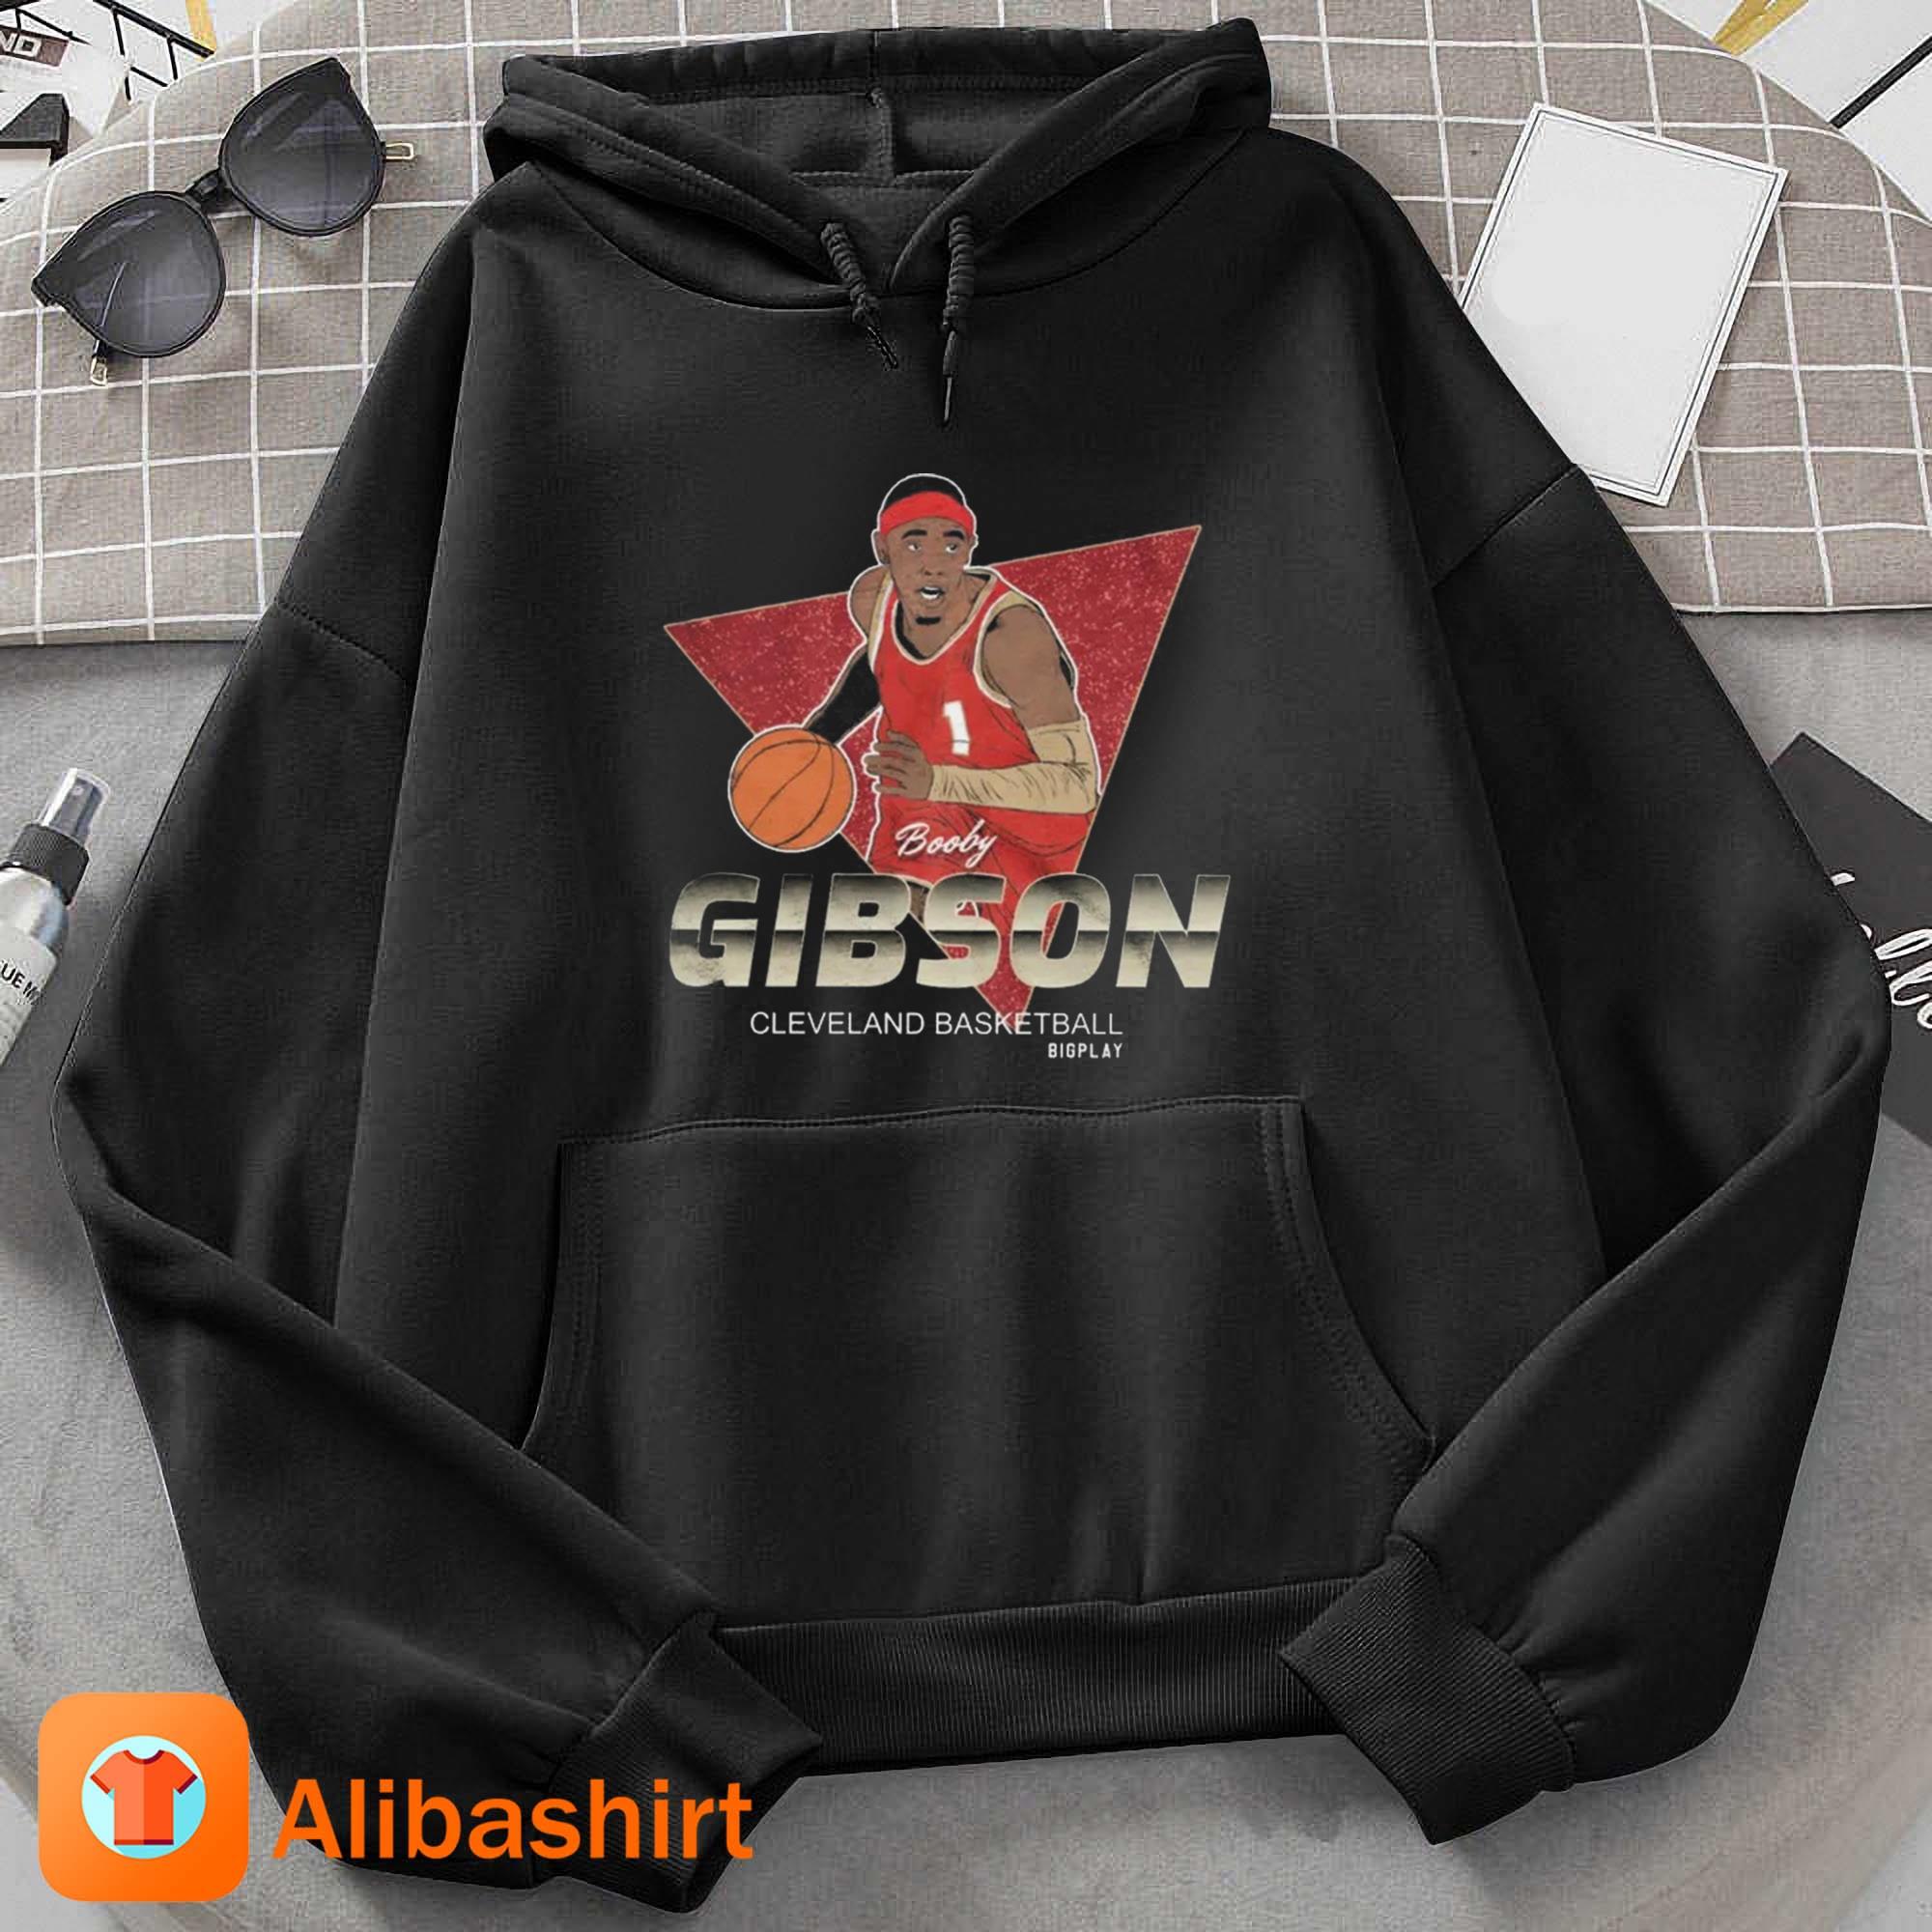 Booby Gibson Cleceland Basketball Shirt Hoodie